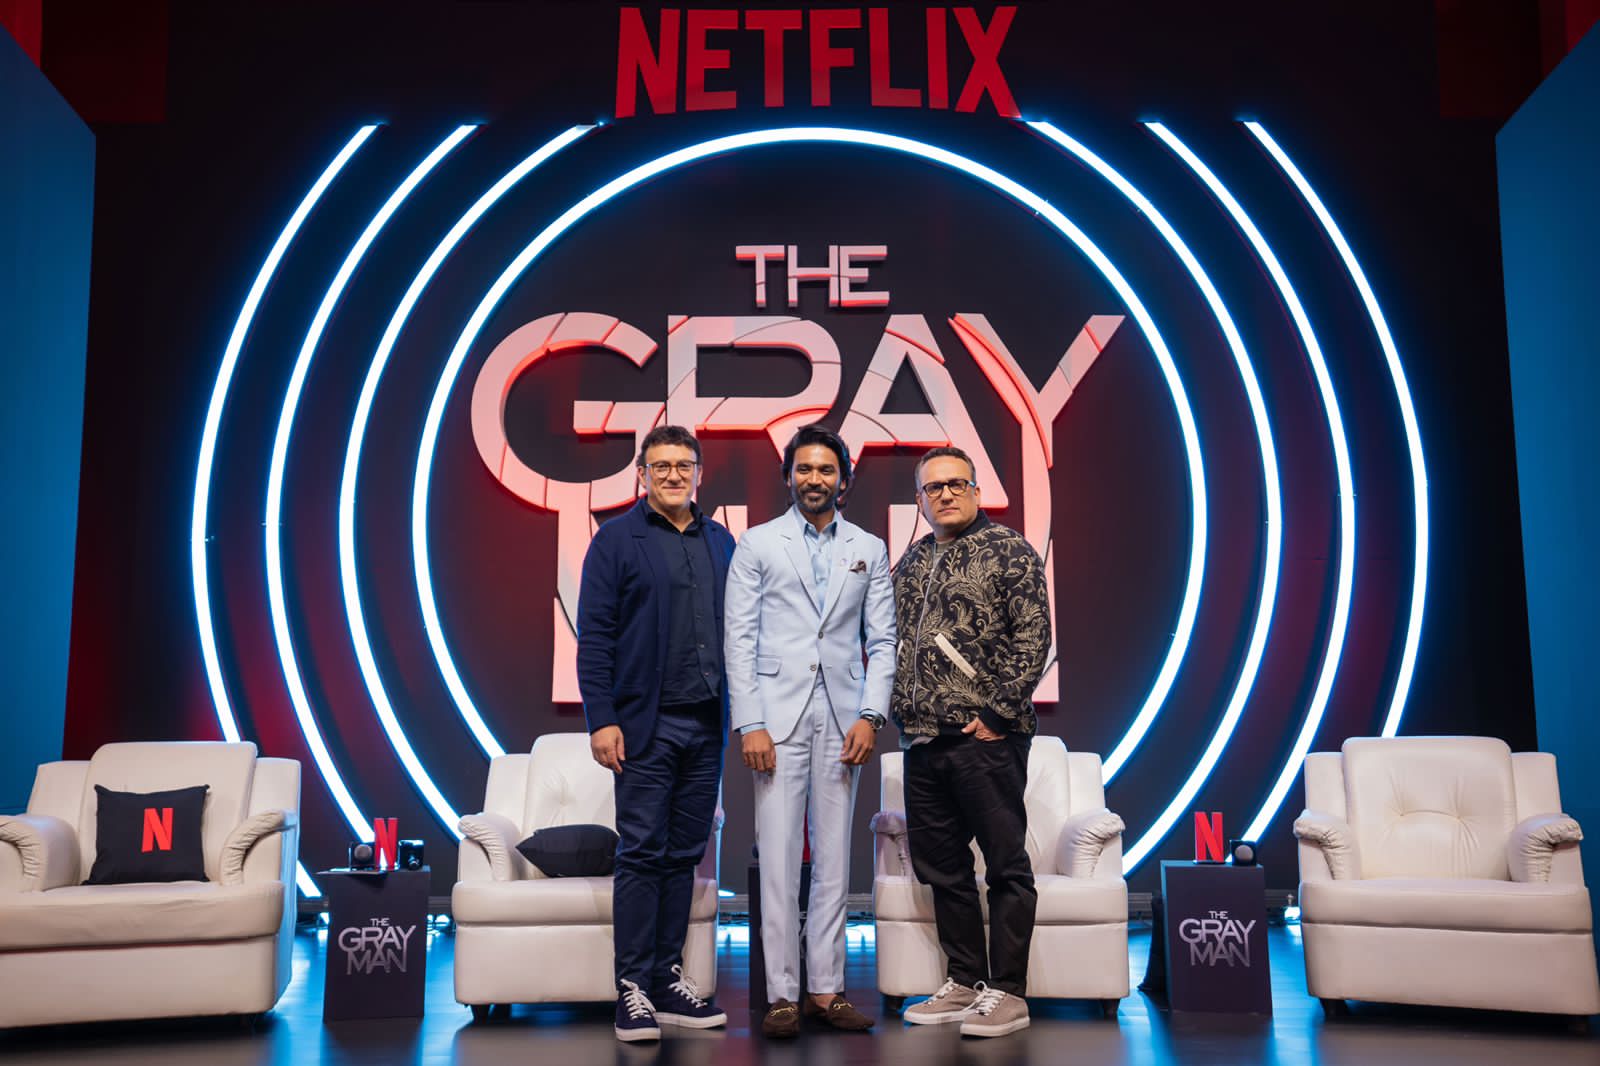 The Gray Man Mumbai Premiere: Dhanush And Russo Brothers Arrive In